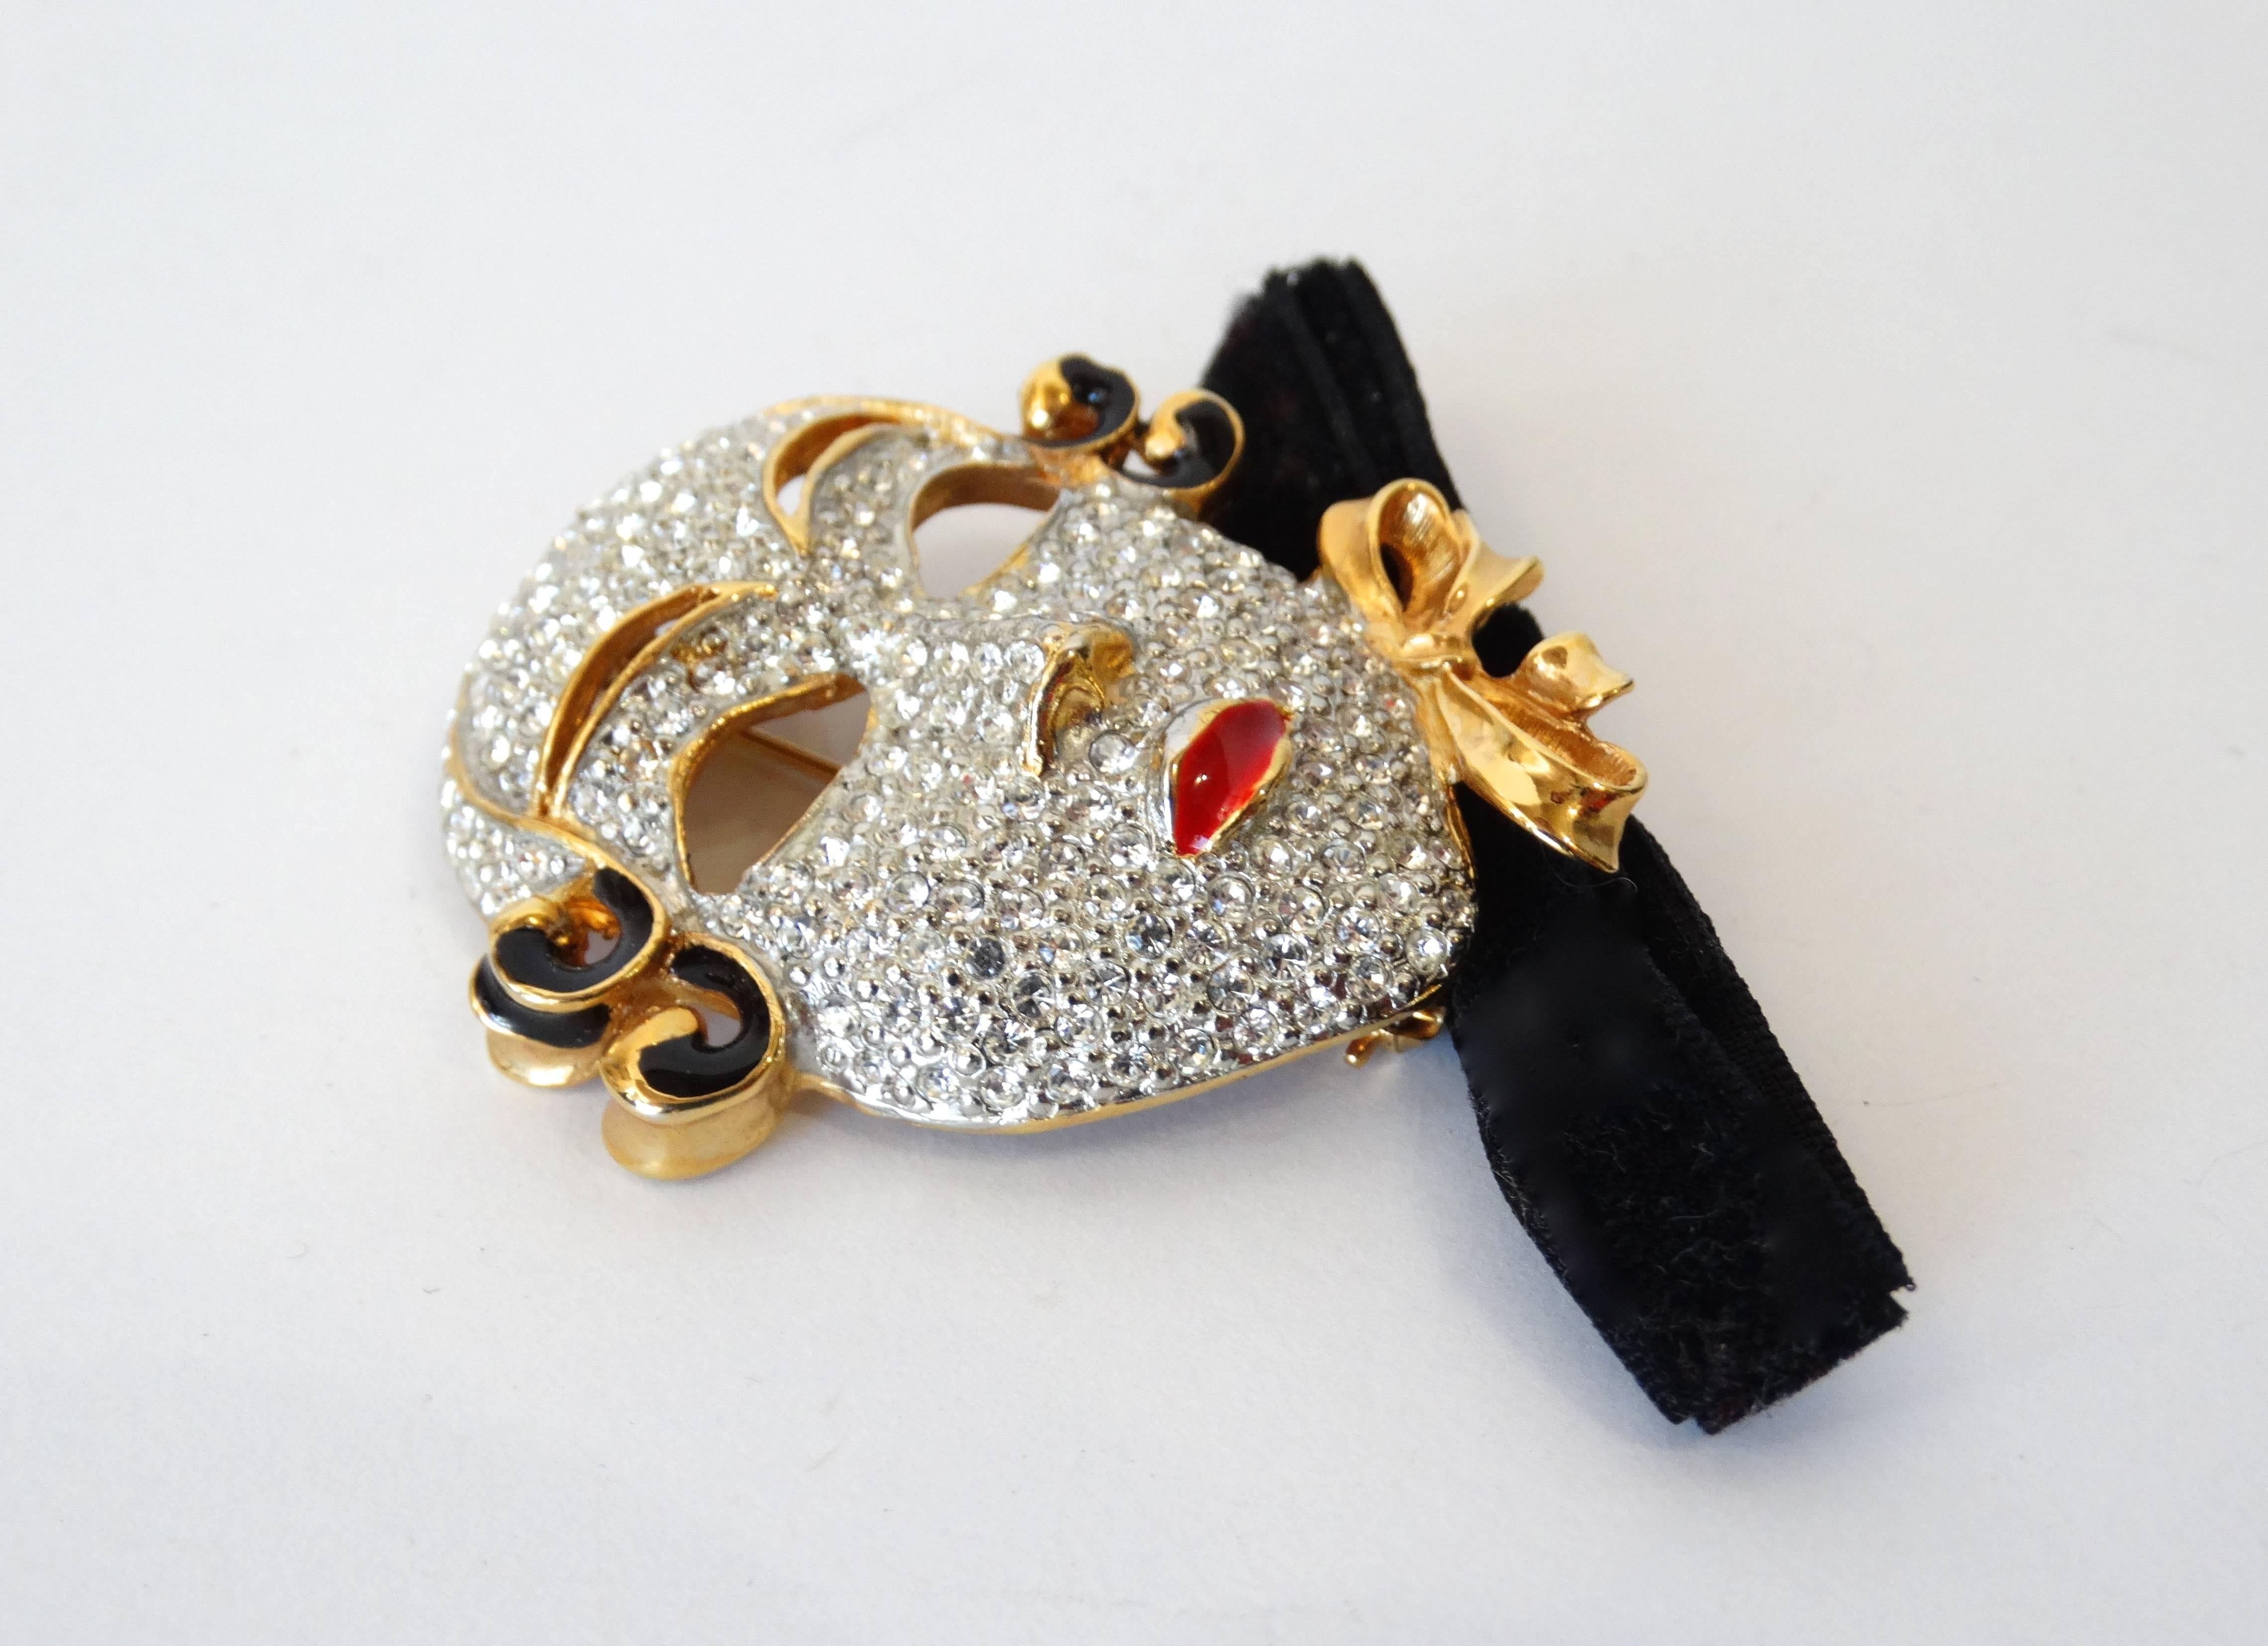 Incredible 1980s rhinestone mask brooch from Ugo Correani! Ugo Correani pieces are hard to come by, he had a hand in designing for Chanel, Versace and many more in the 70s and 80s! Silver metal mask face accented with crystalline rhinestones and